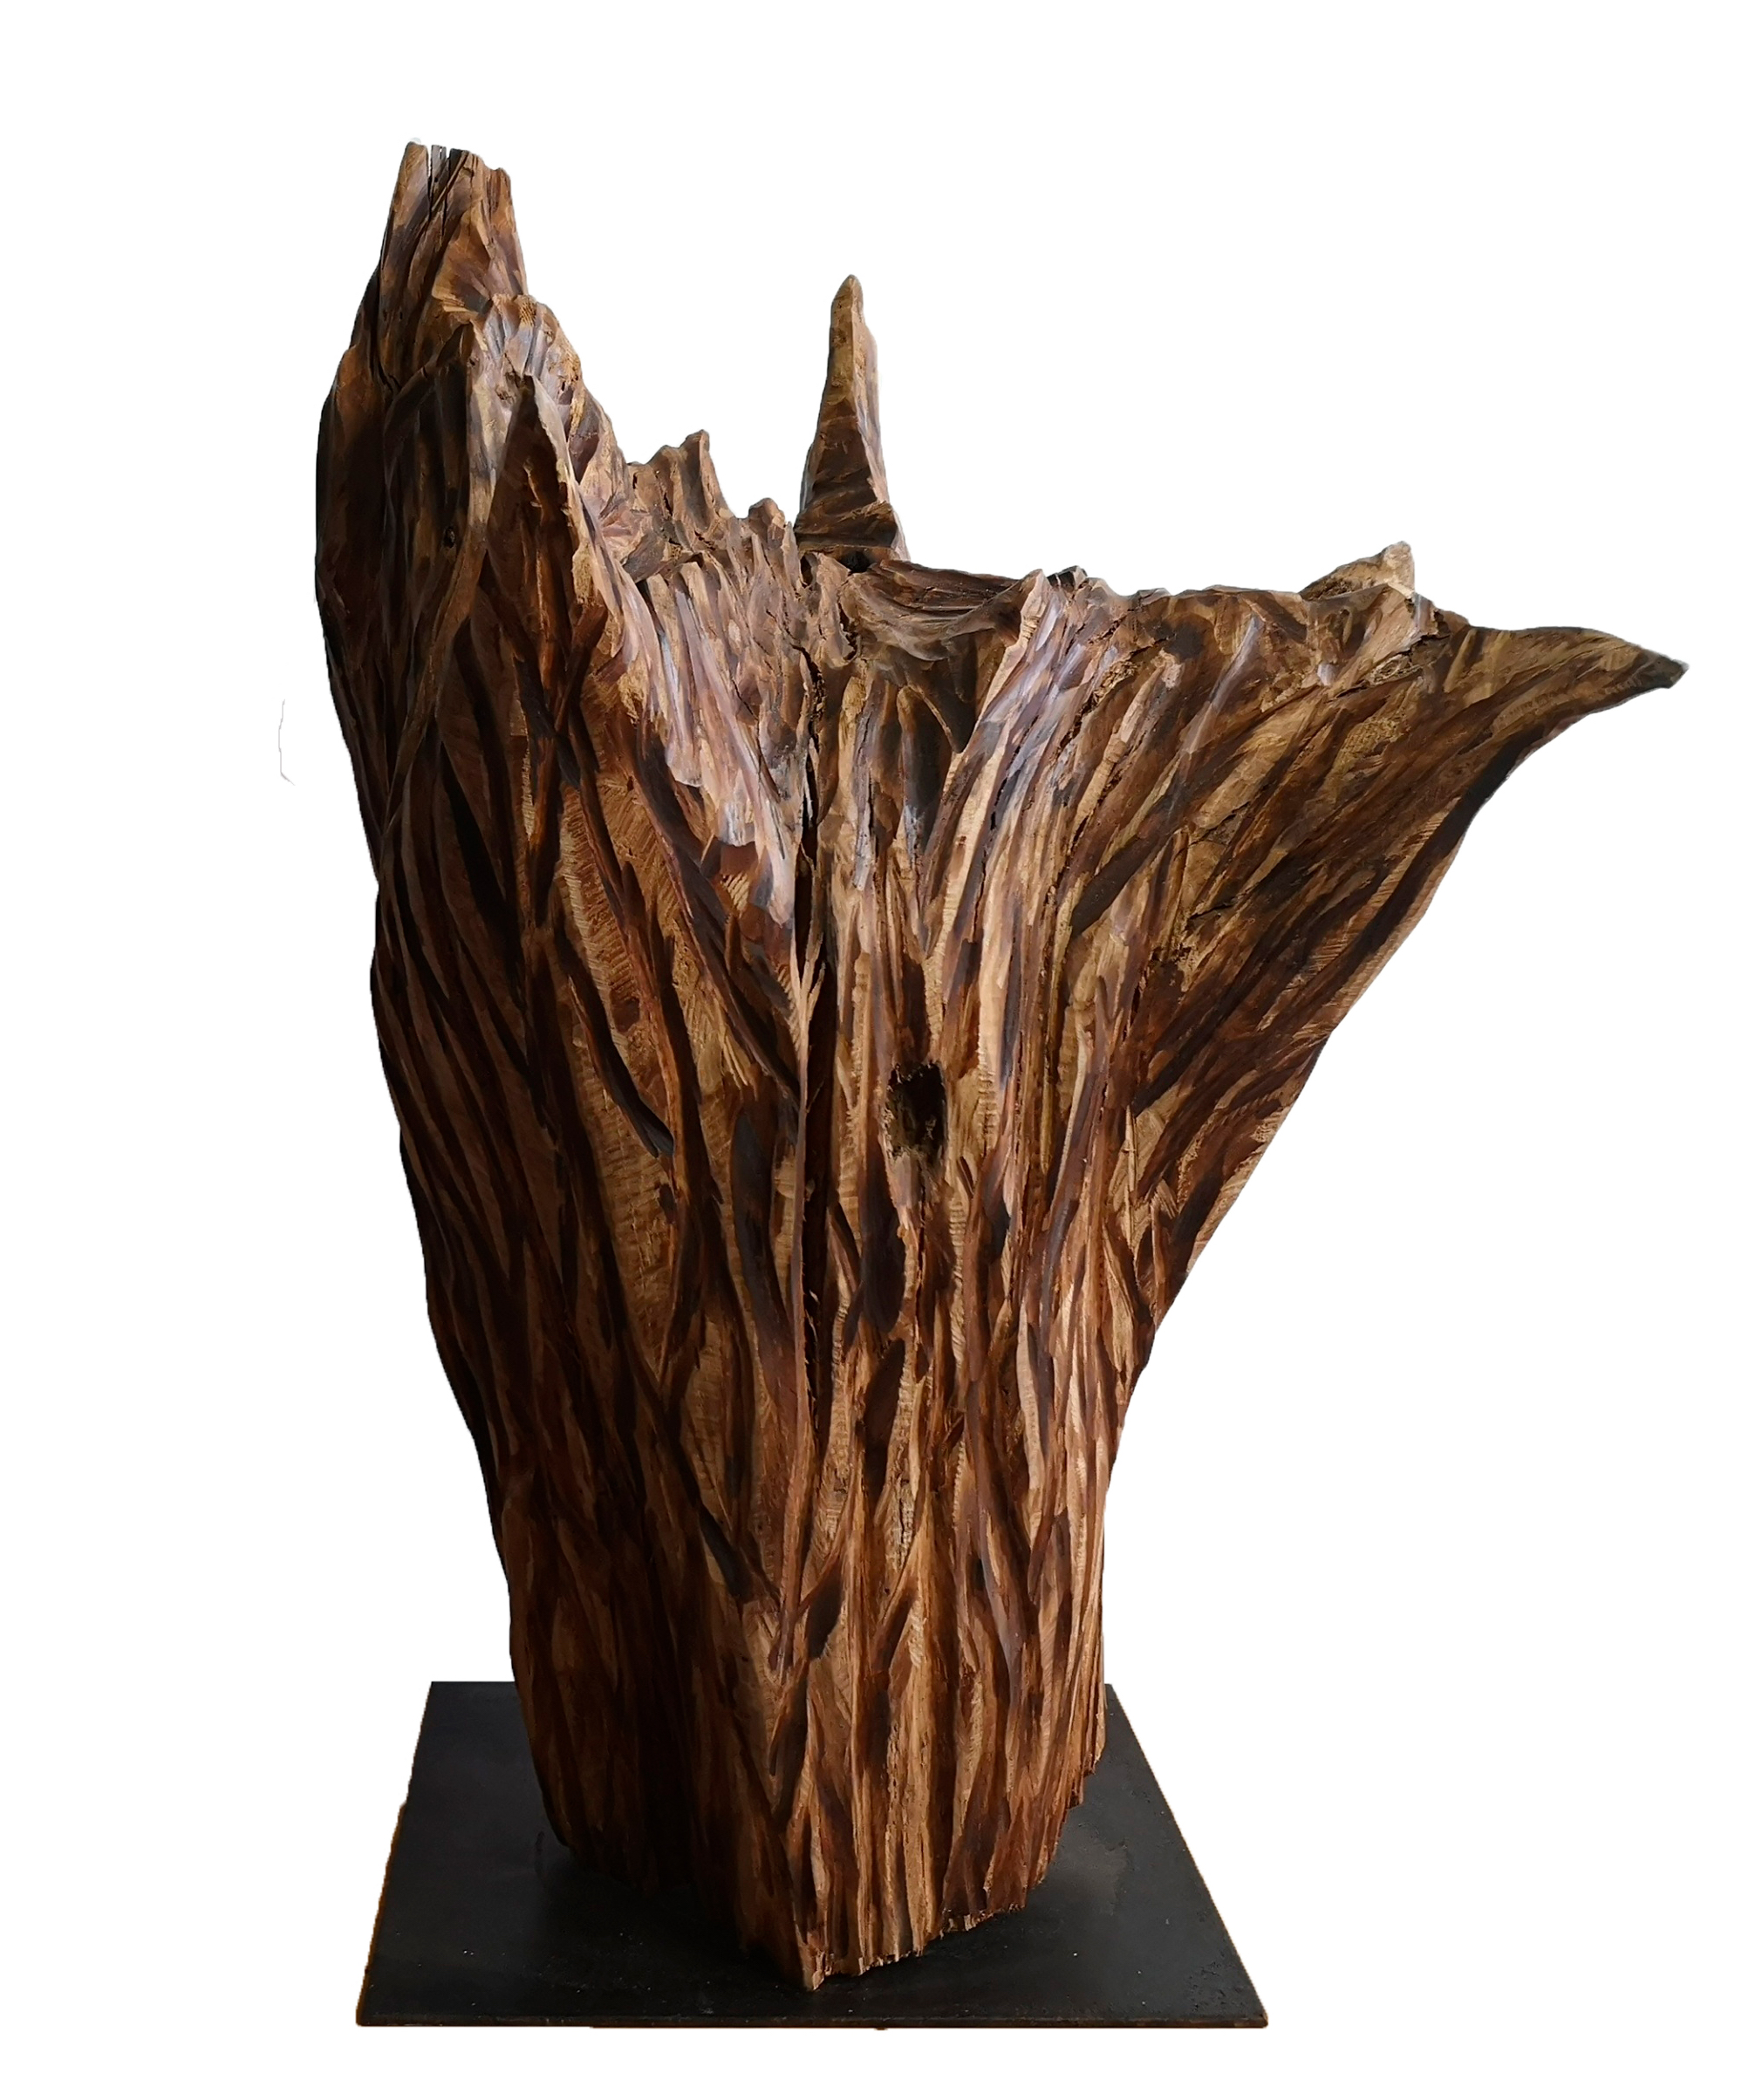 arthurfrenoy yggdrasil sculpture abstrait theartcycle photo_principale.jpg The Art Cycle